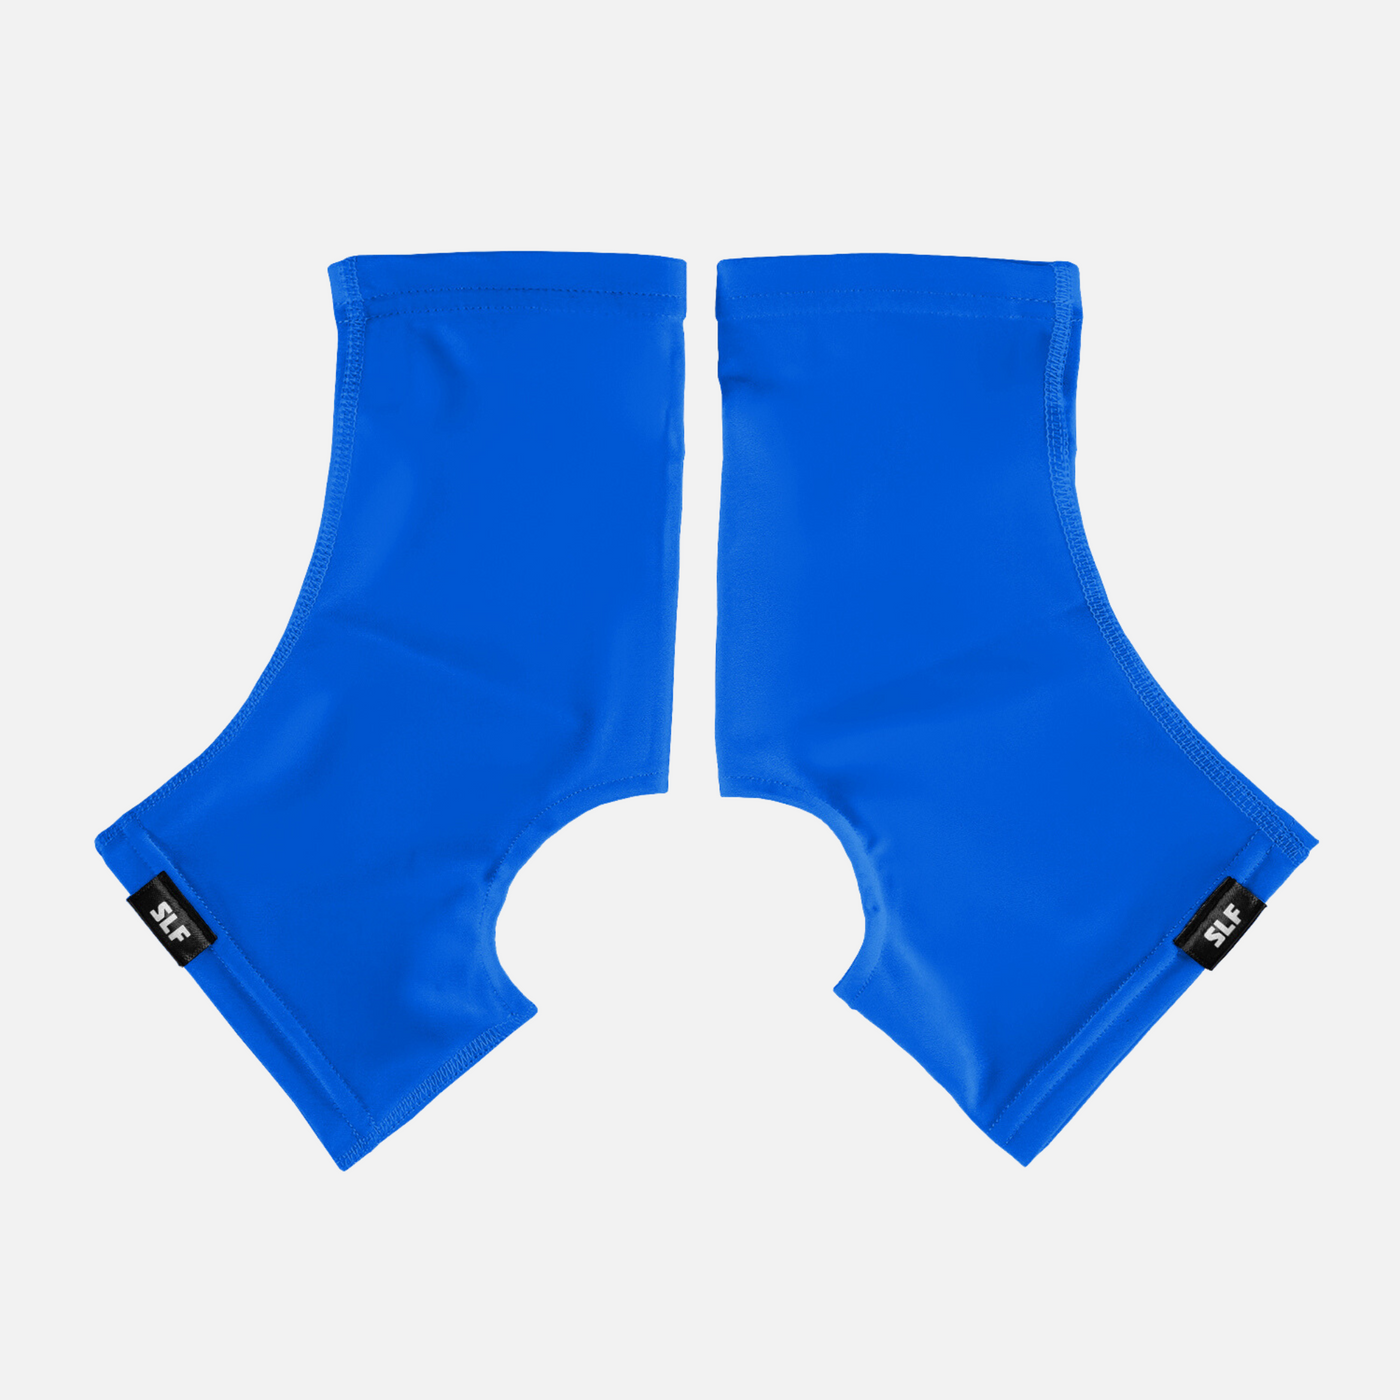 Hue Blue Spats / Cleat Covers